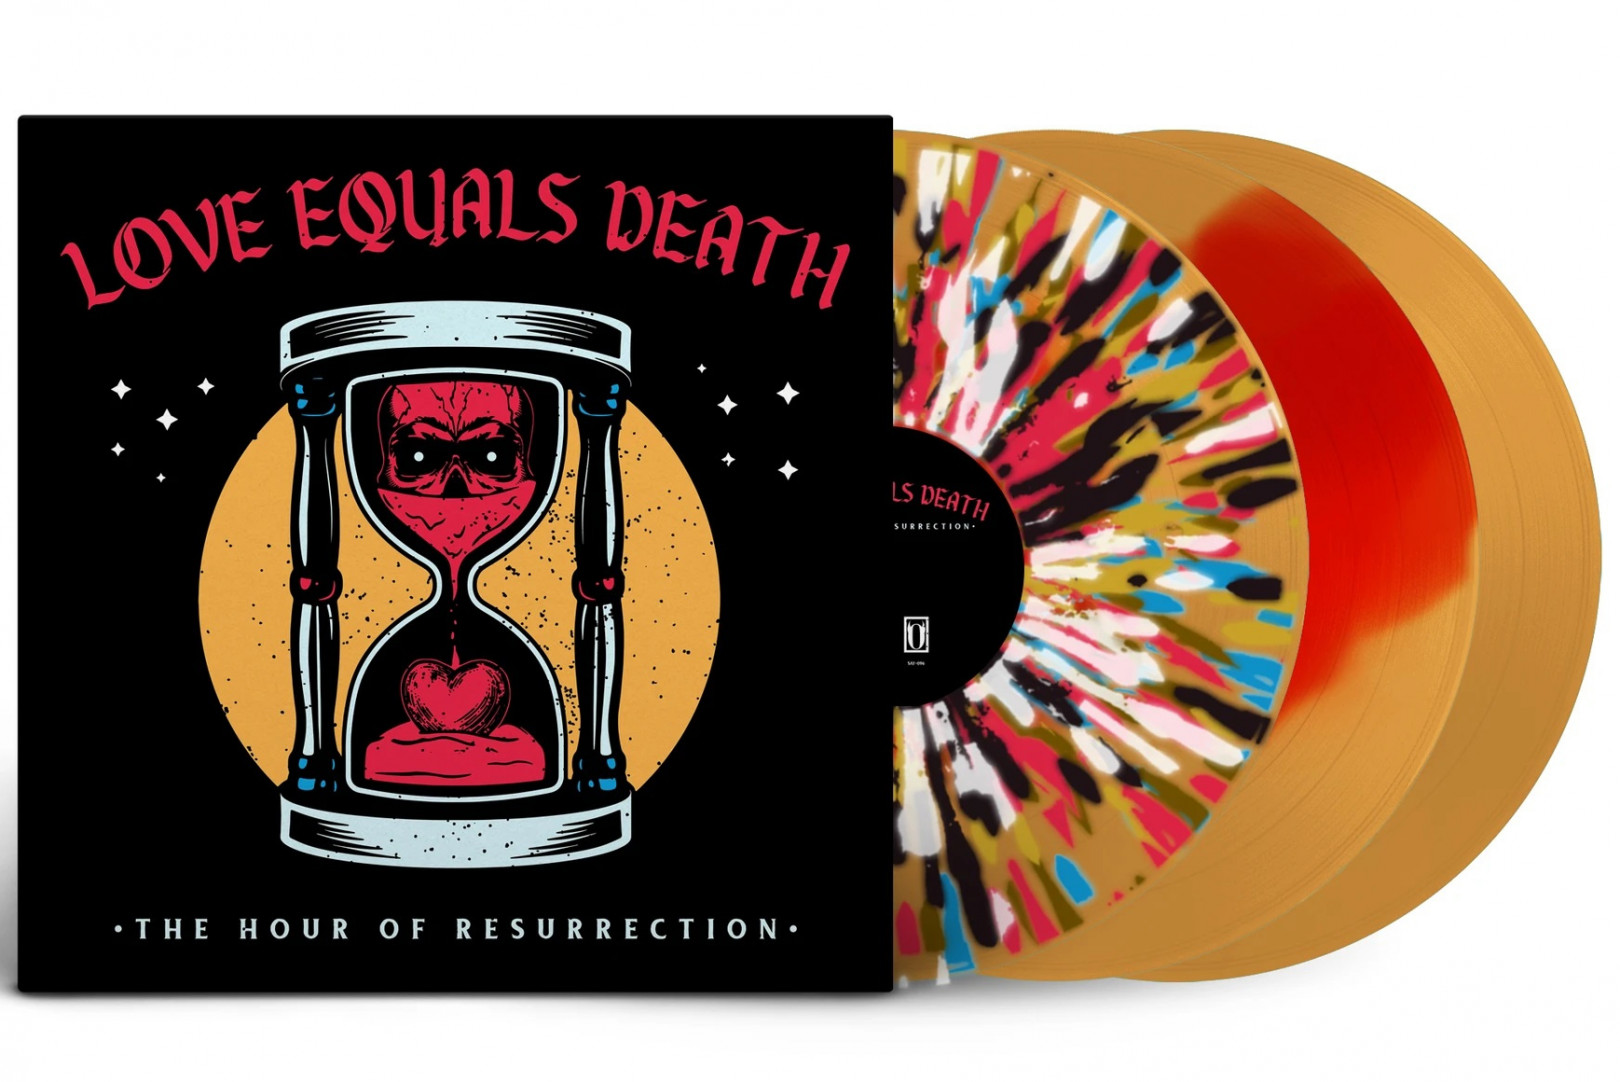 Love Equals Death to release EP compilation